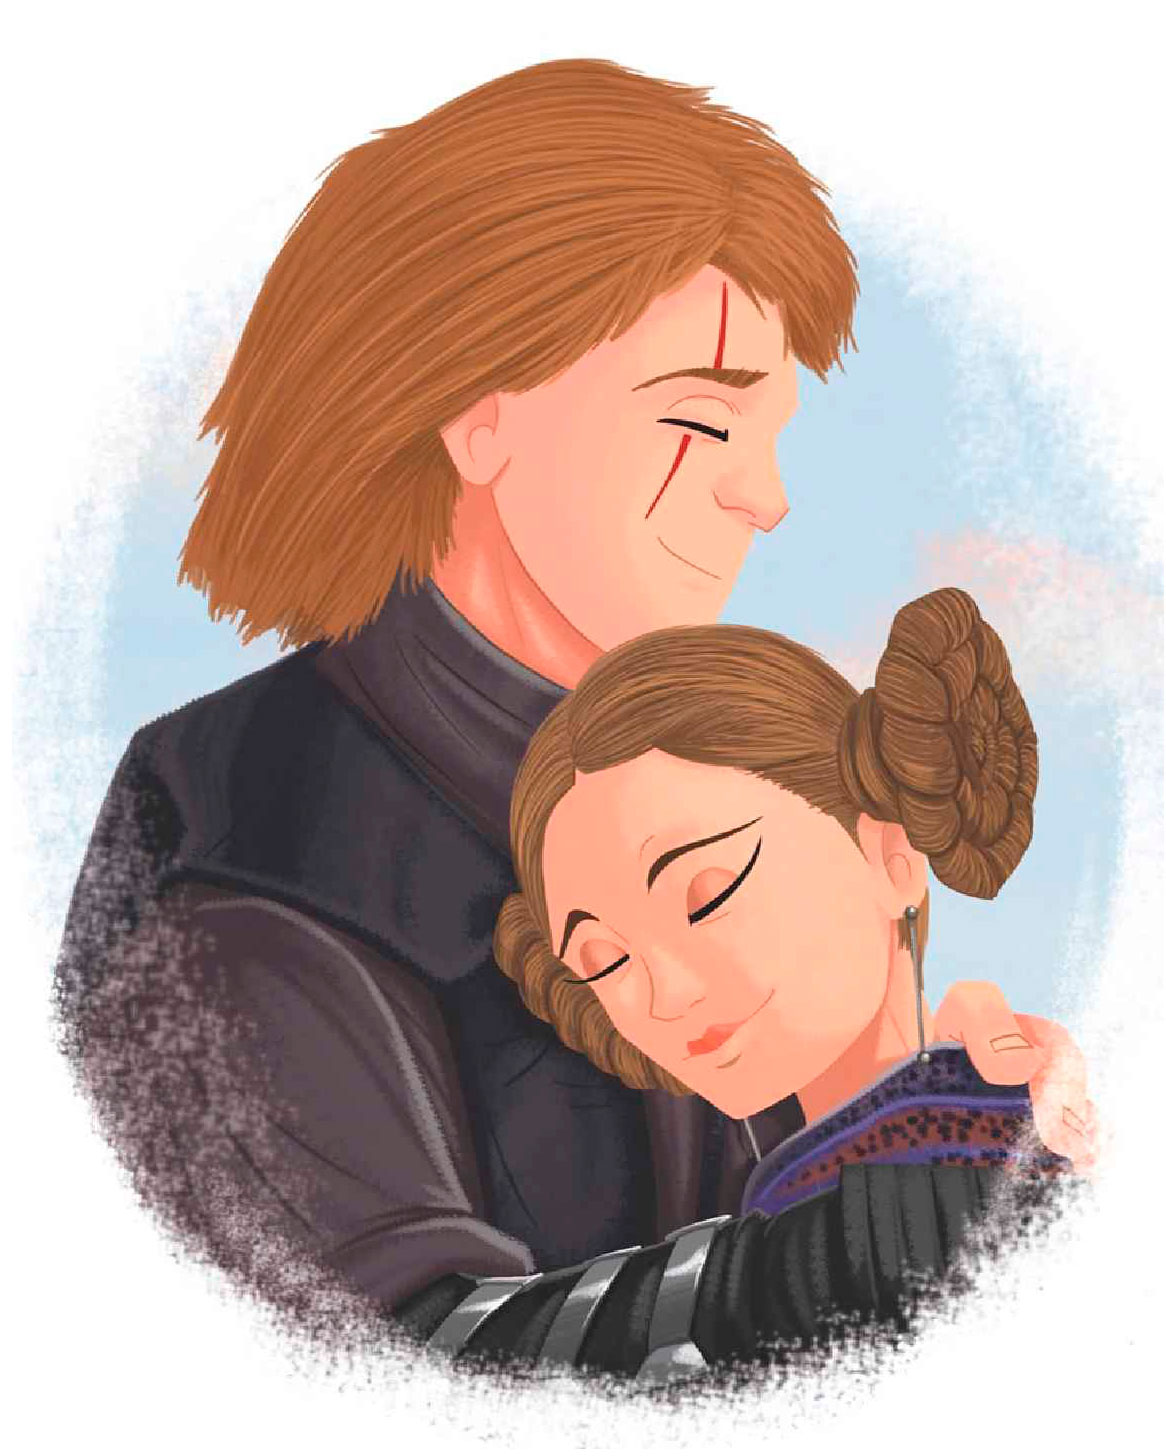 Star Wars Little Golden Books Anakin & Padme AOTC Scans | Anakin And His Angel